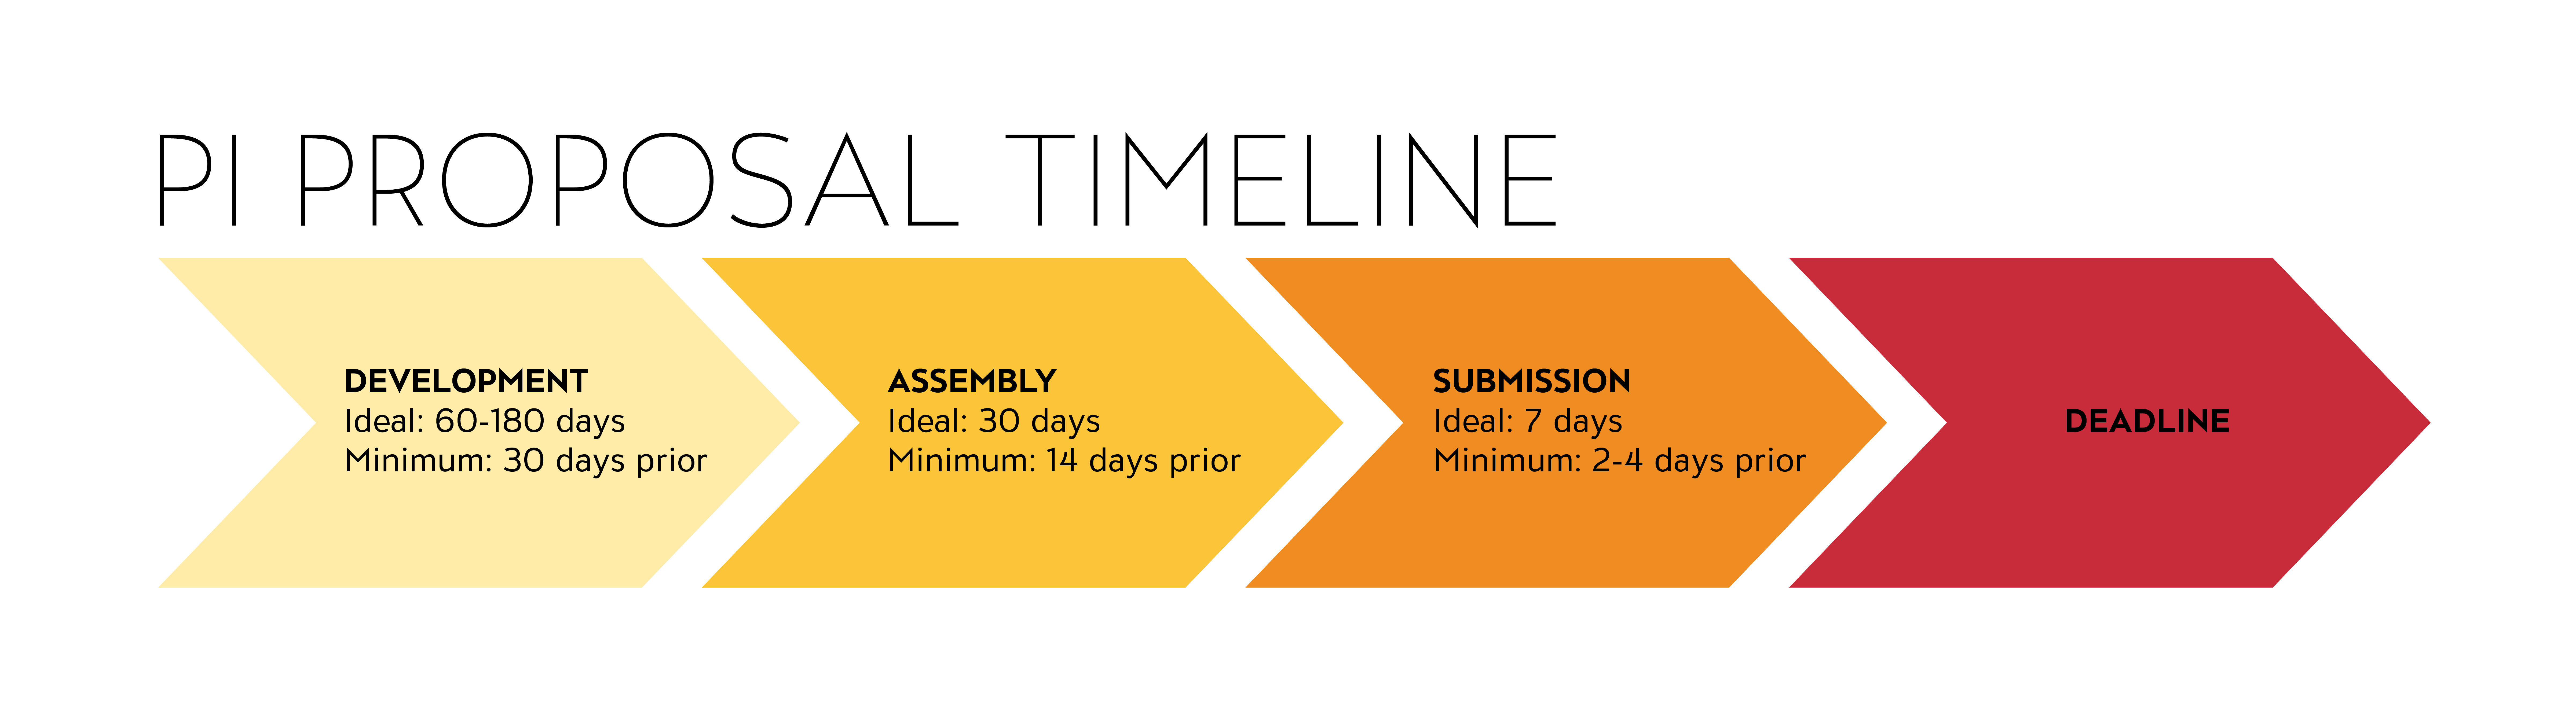 phd proposal timeline example